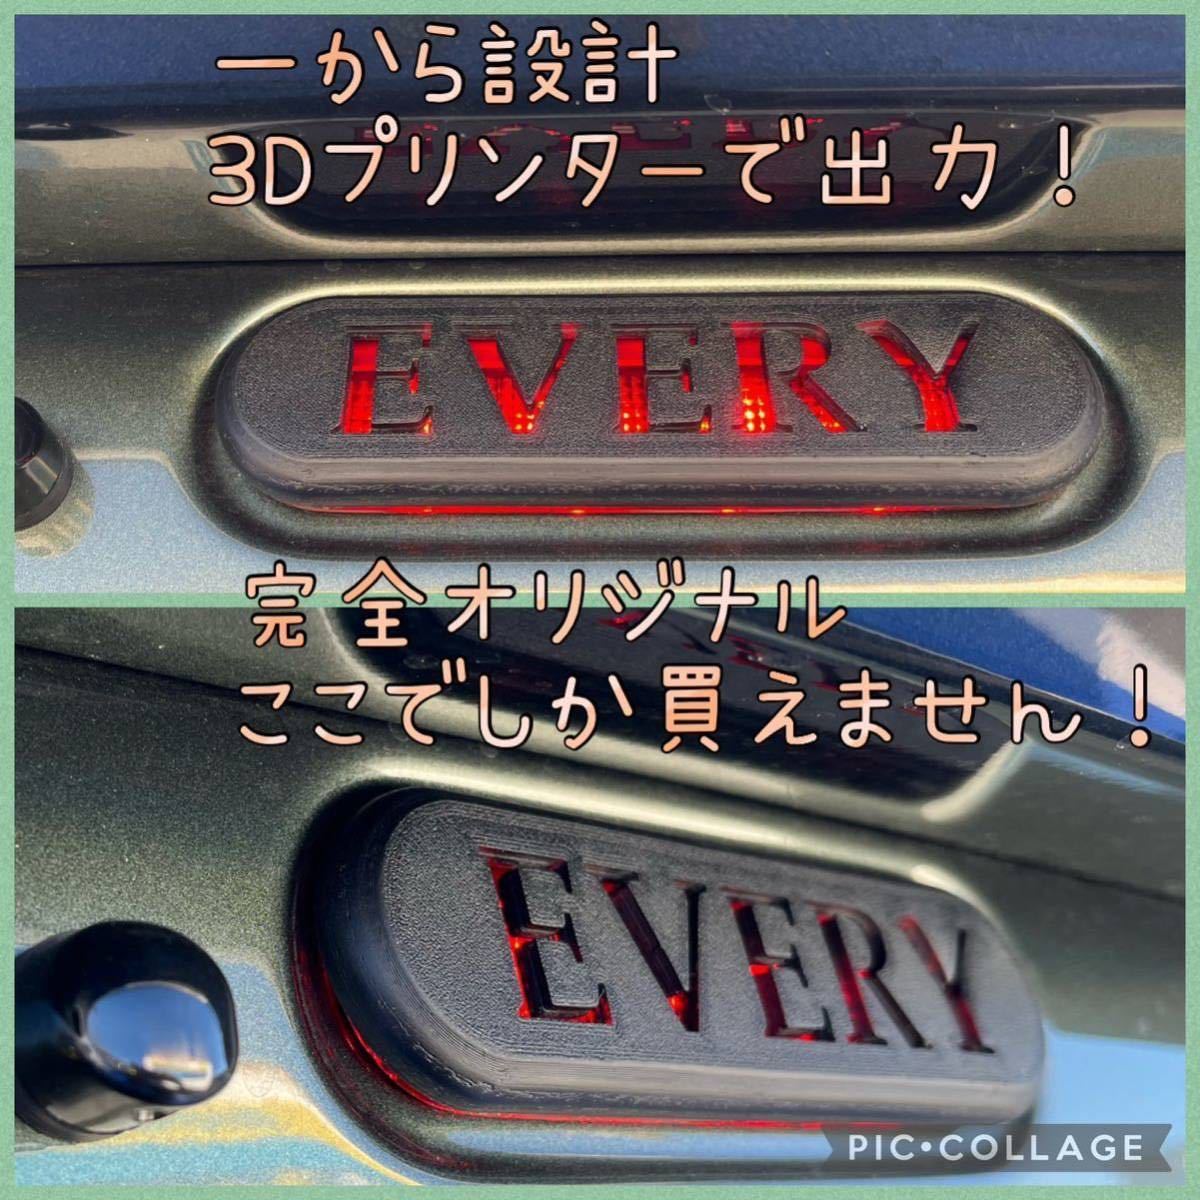 DA17W/DA17V Every / Every Wagon exclusive use EVERY character high-mount stoplamp cover complete original goods A8